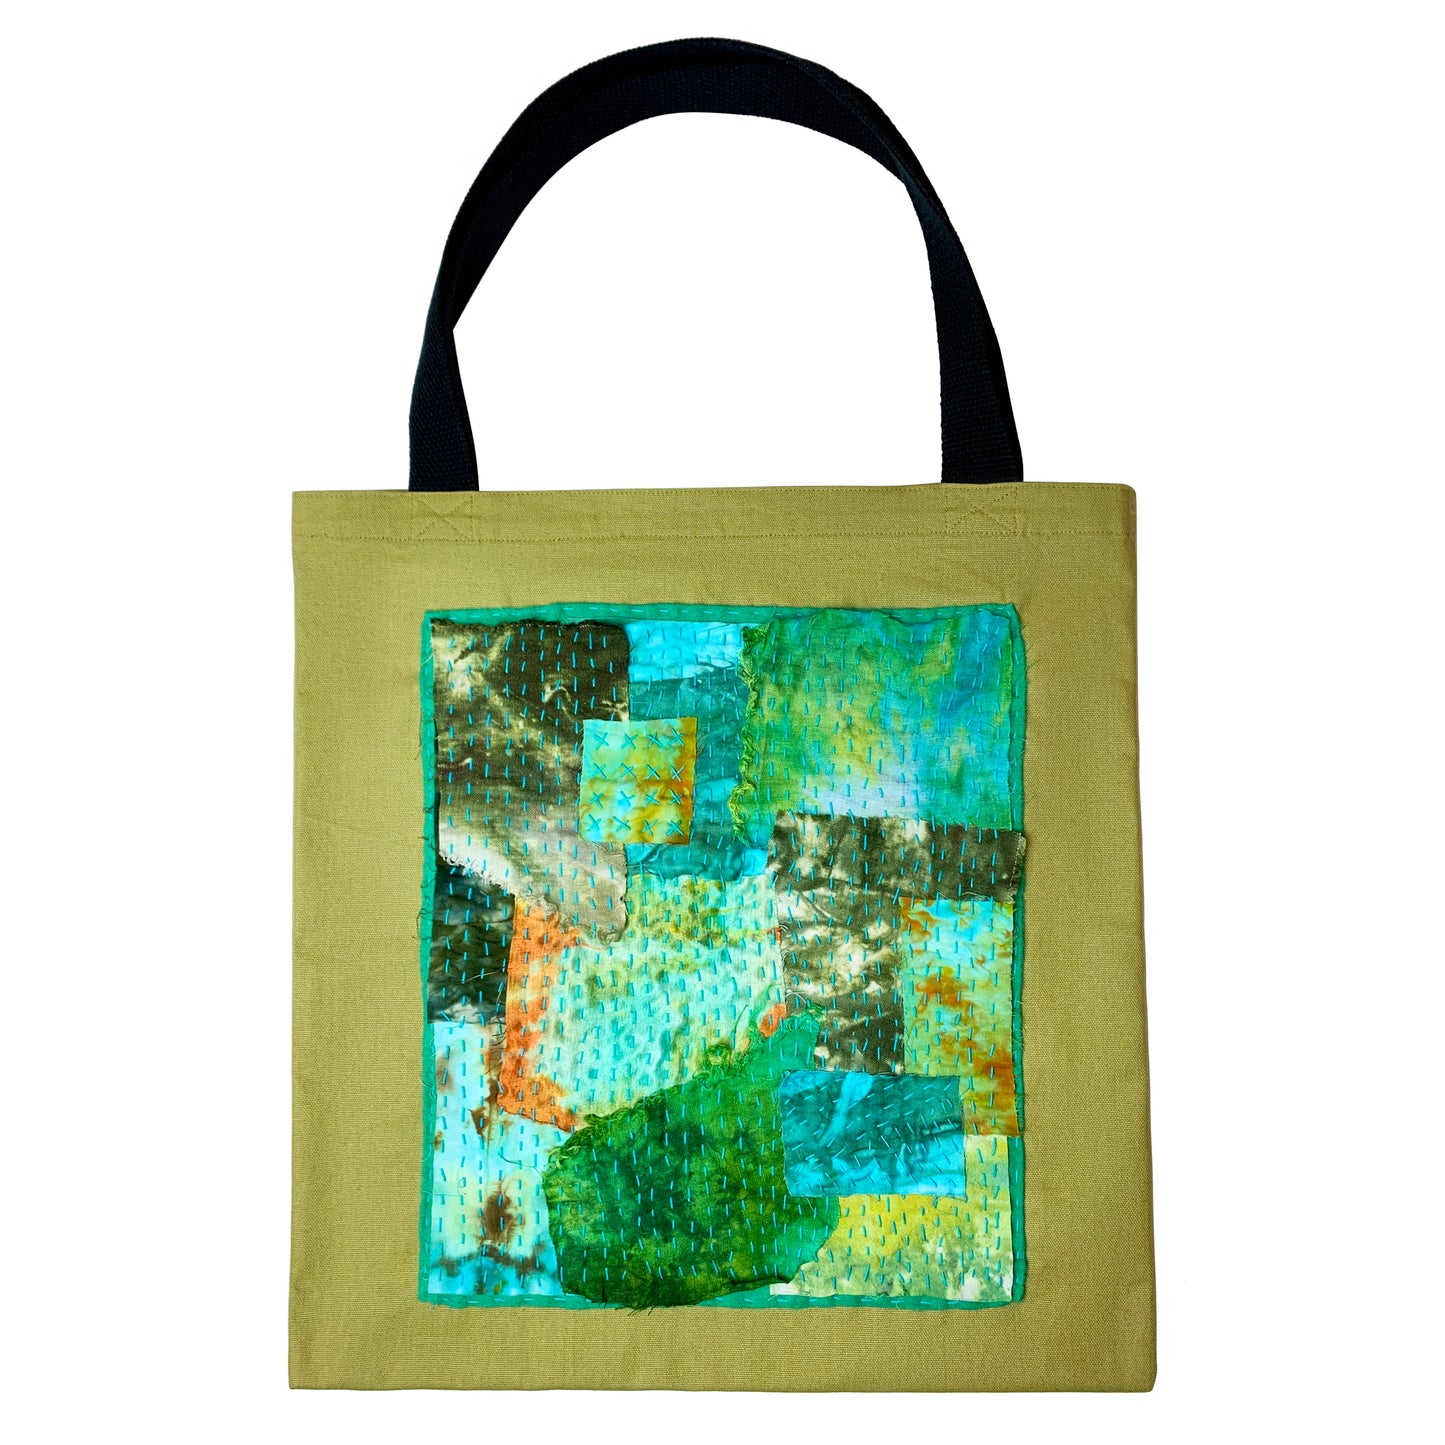 Make Your Own ONE OF A KIND tote bag